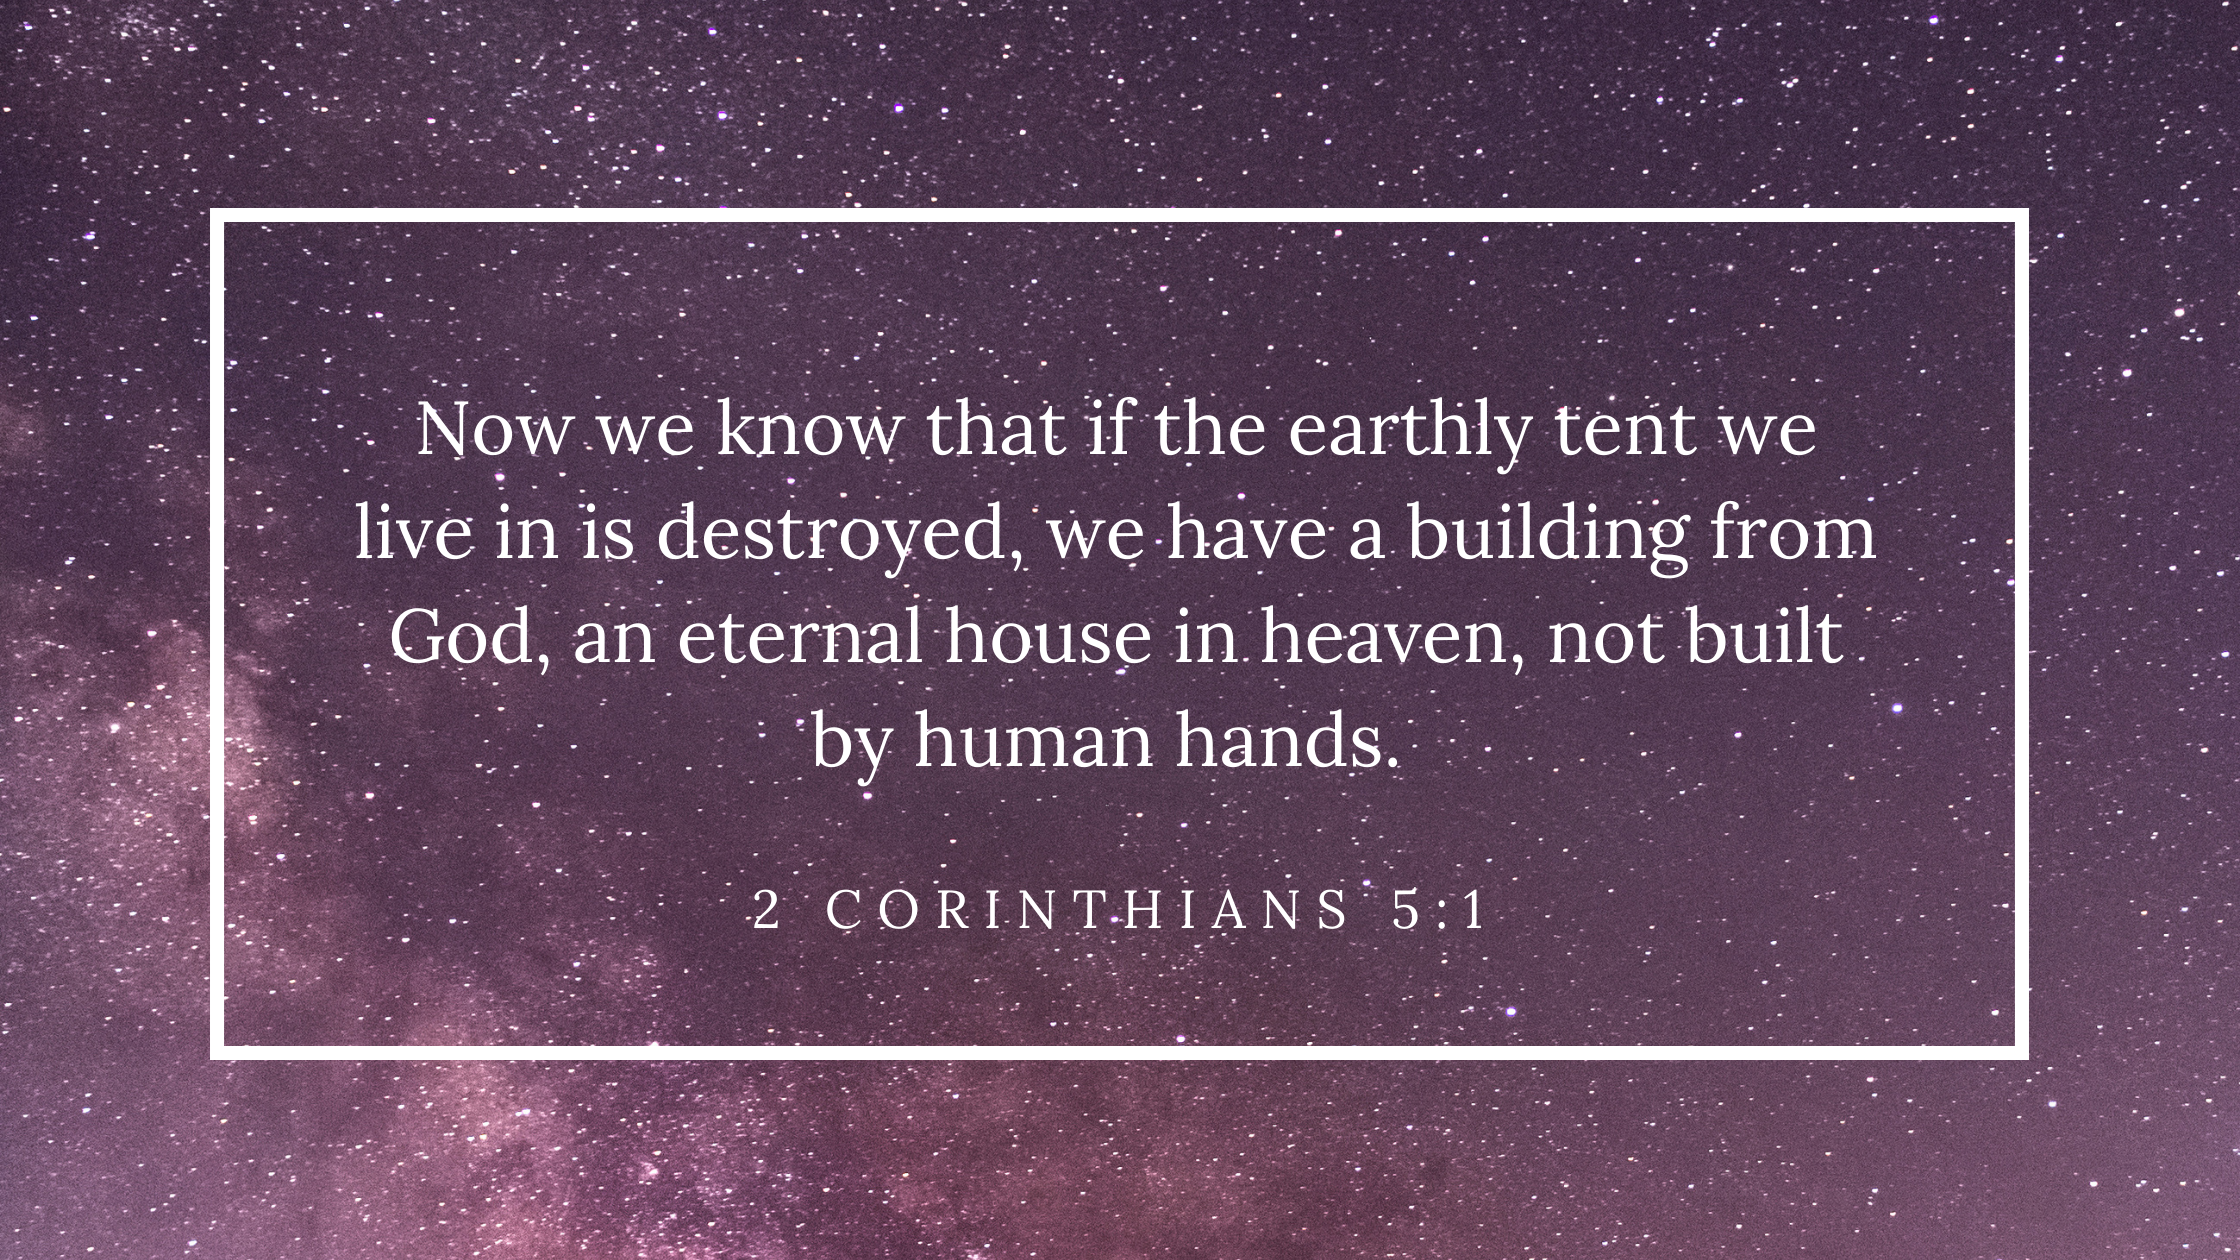 Now we know that if the earthly tent we live in is destroyed, we have a building from God, an eternal house in heaven, not built by human hands. 2Cor.